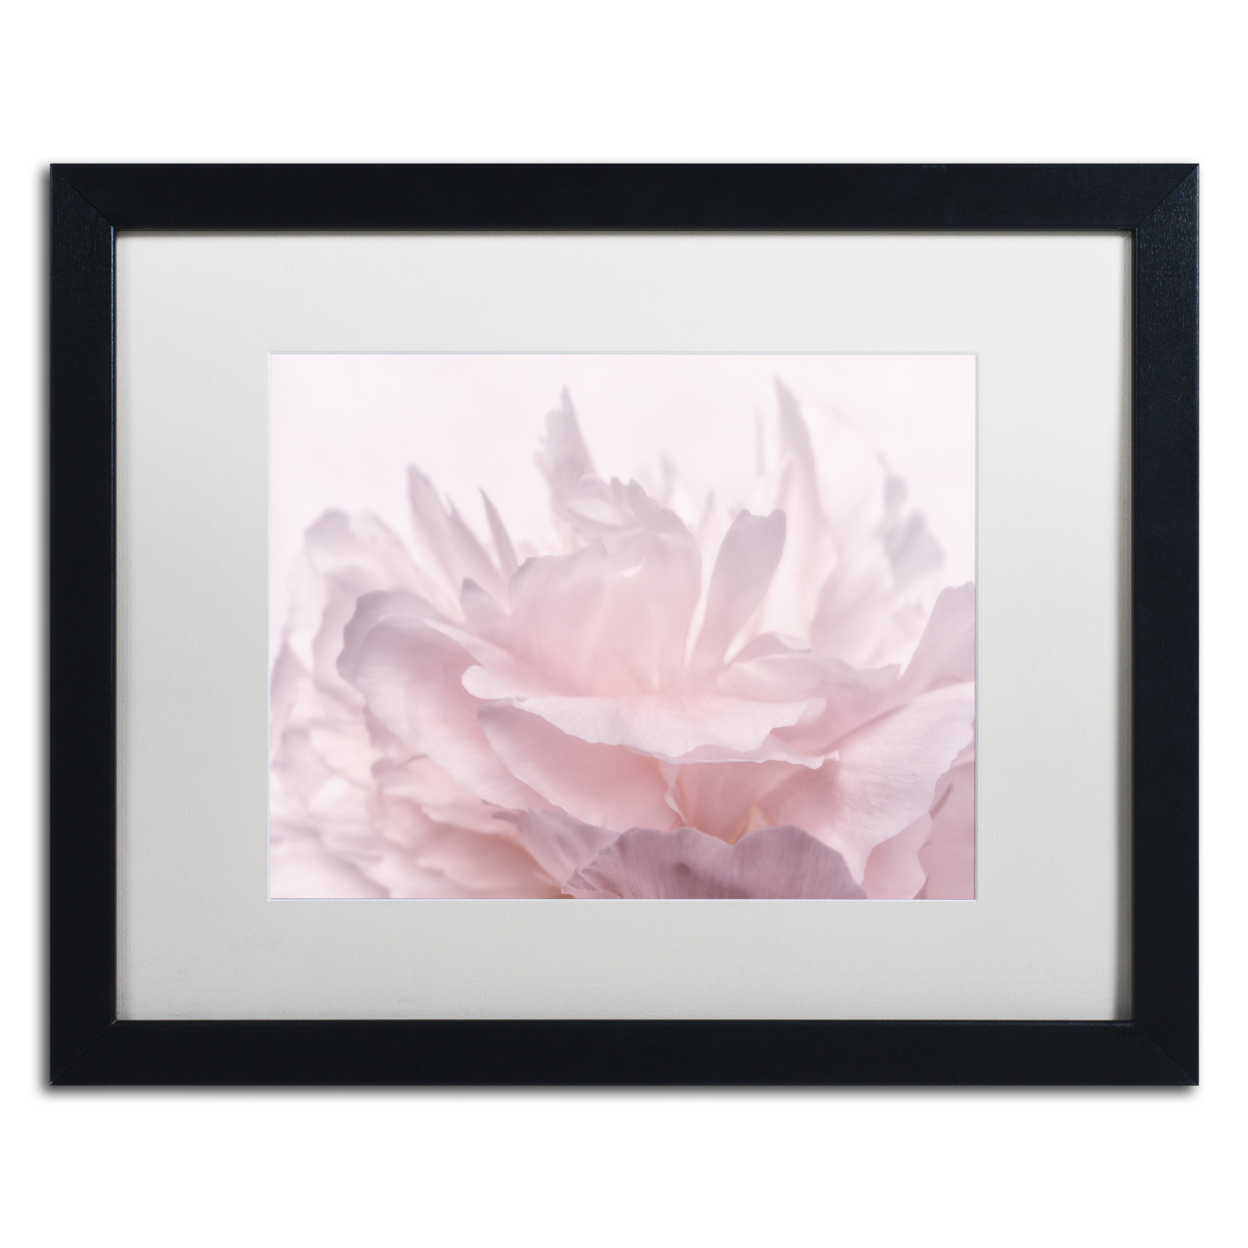 Cora Niele 'Pink Peony Petals III' Black Wooden Framed Art 18 X 22 Inches